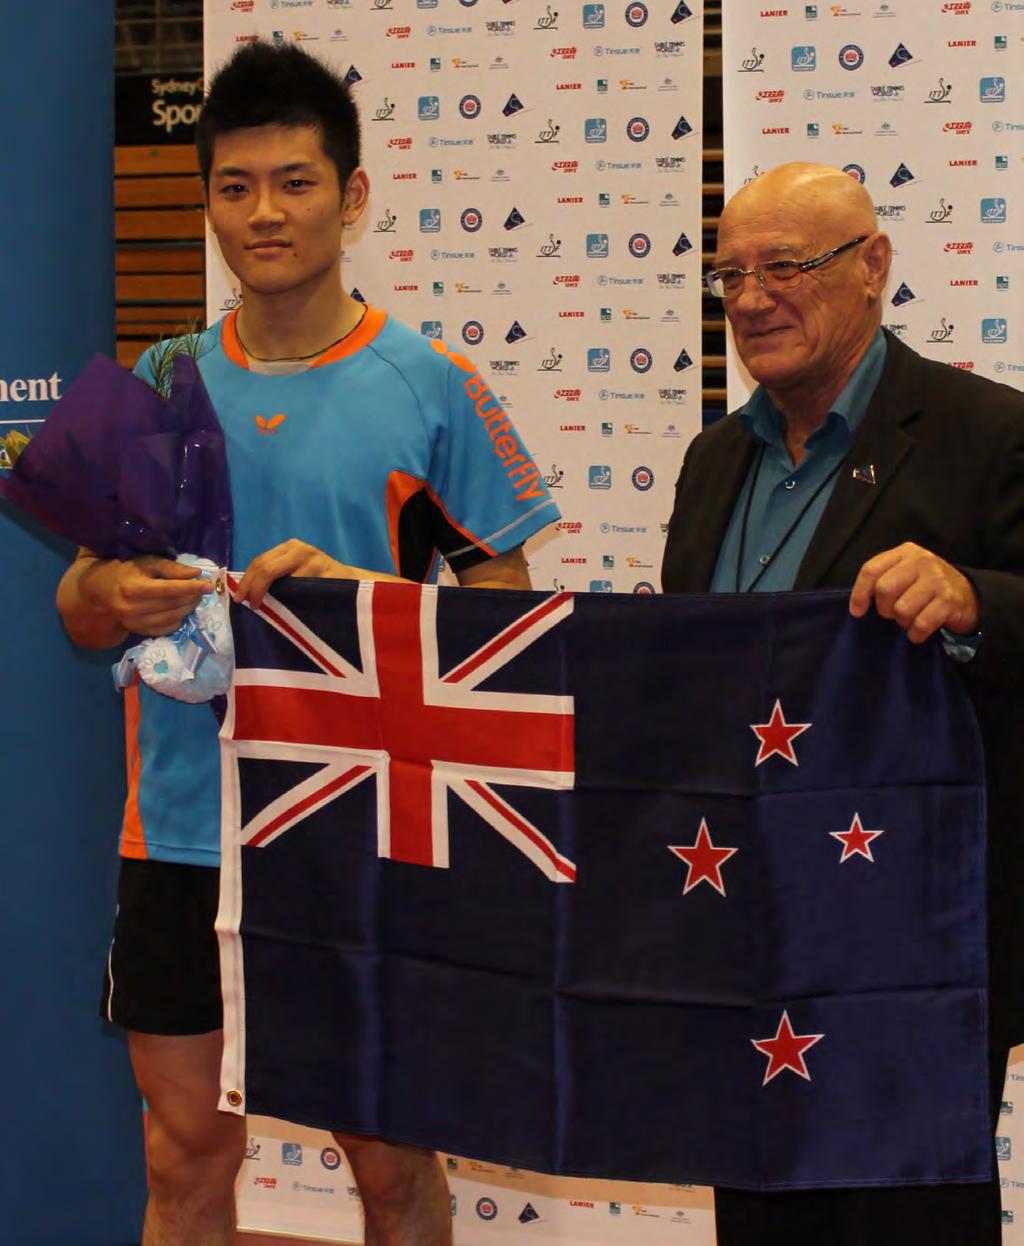 ITTF-OCEANIA EVENTS EVENT 4: OCEANIA OLYMPIC GAMES QUALIFICATION TOURNAMENT OLYMPIC GAMES QUALIFICATION The Oceania Olympic Games Qualification Tournament sees athletes from Oceania countries